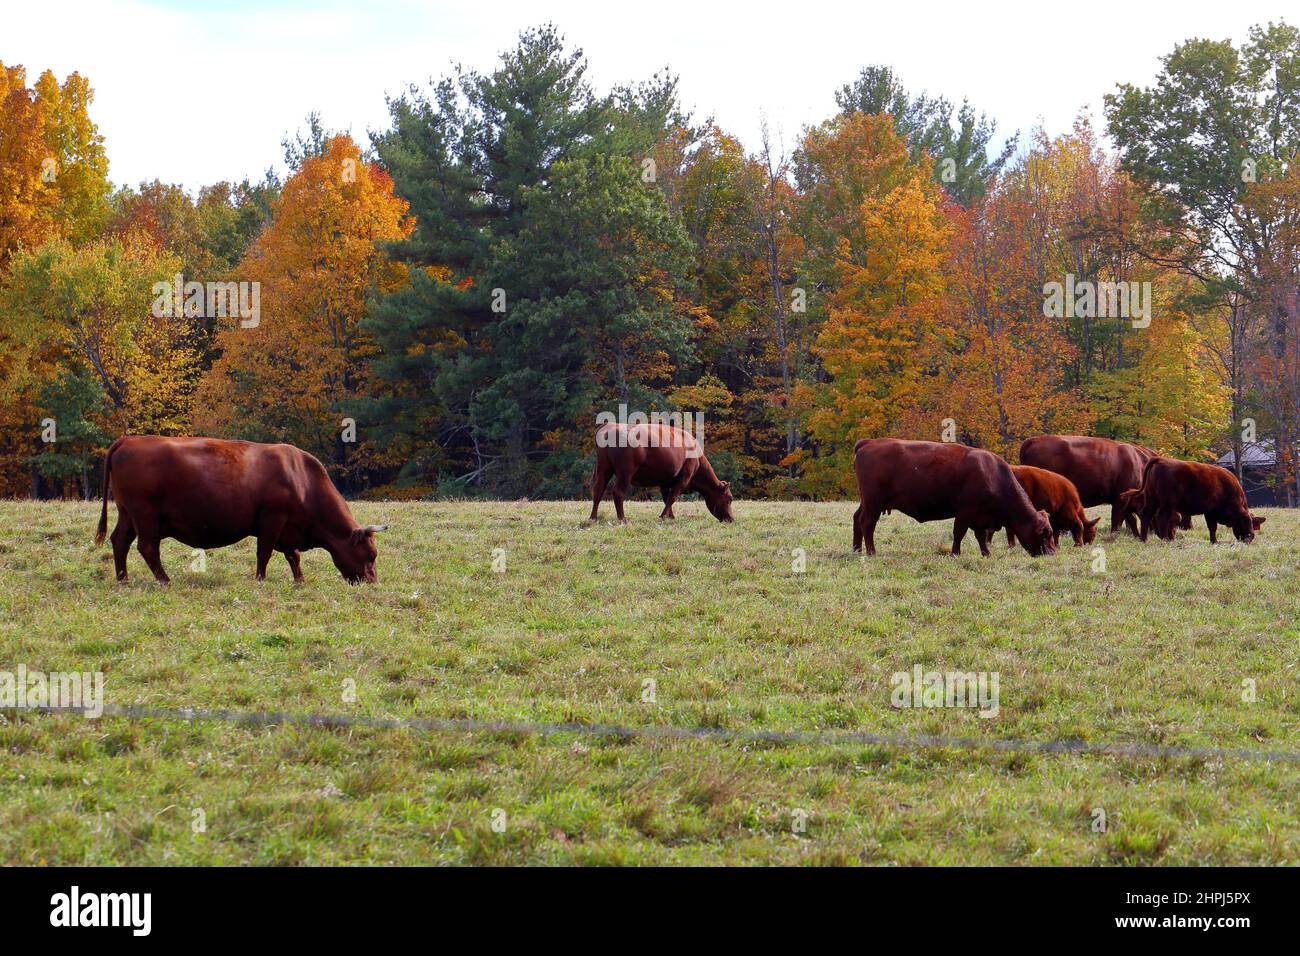 Red Devon cows grazing on the grass against an autumn fall foliage background in New York's Mid-Hudson Valley. pasture raised cattle Stock Photo